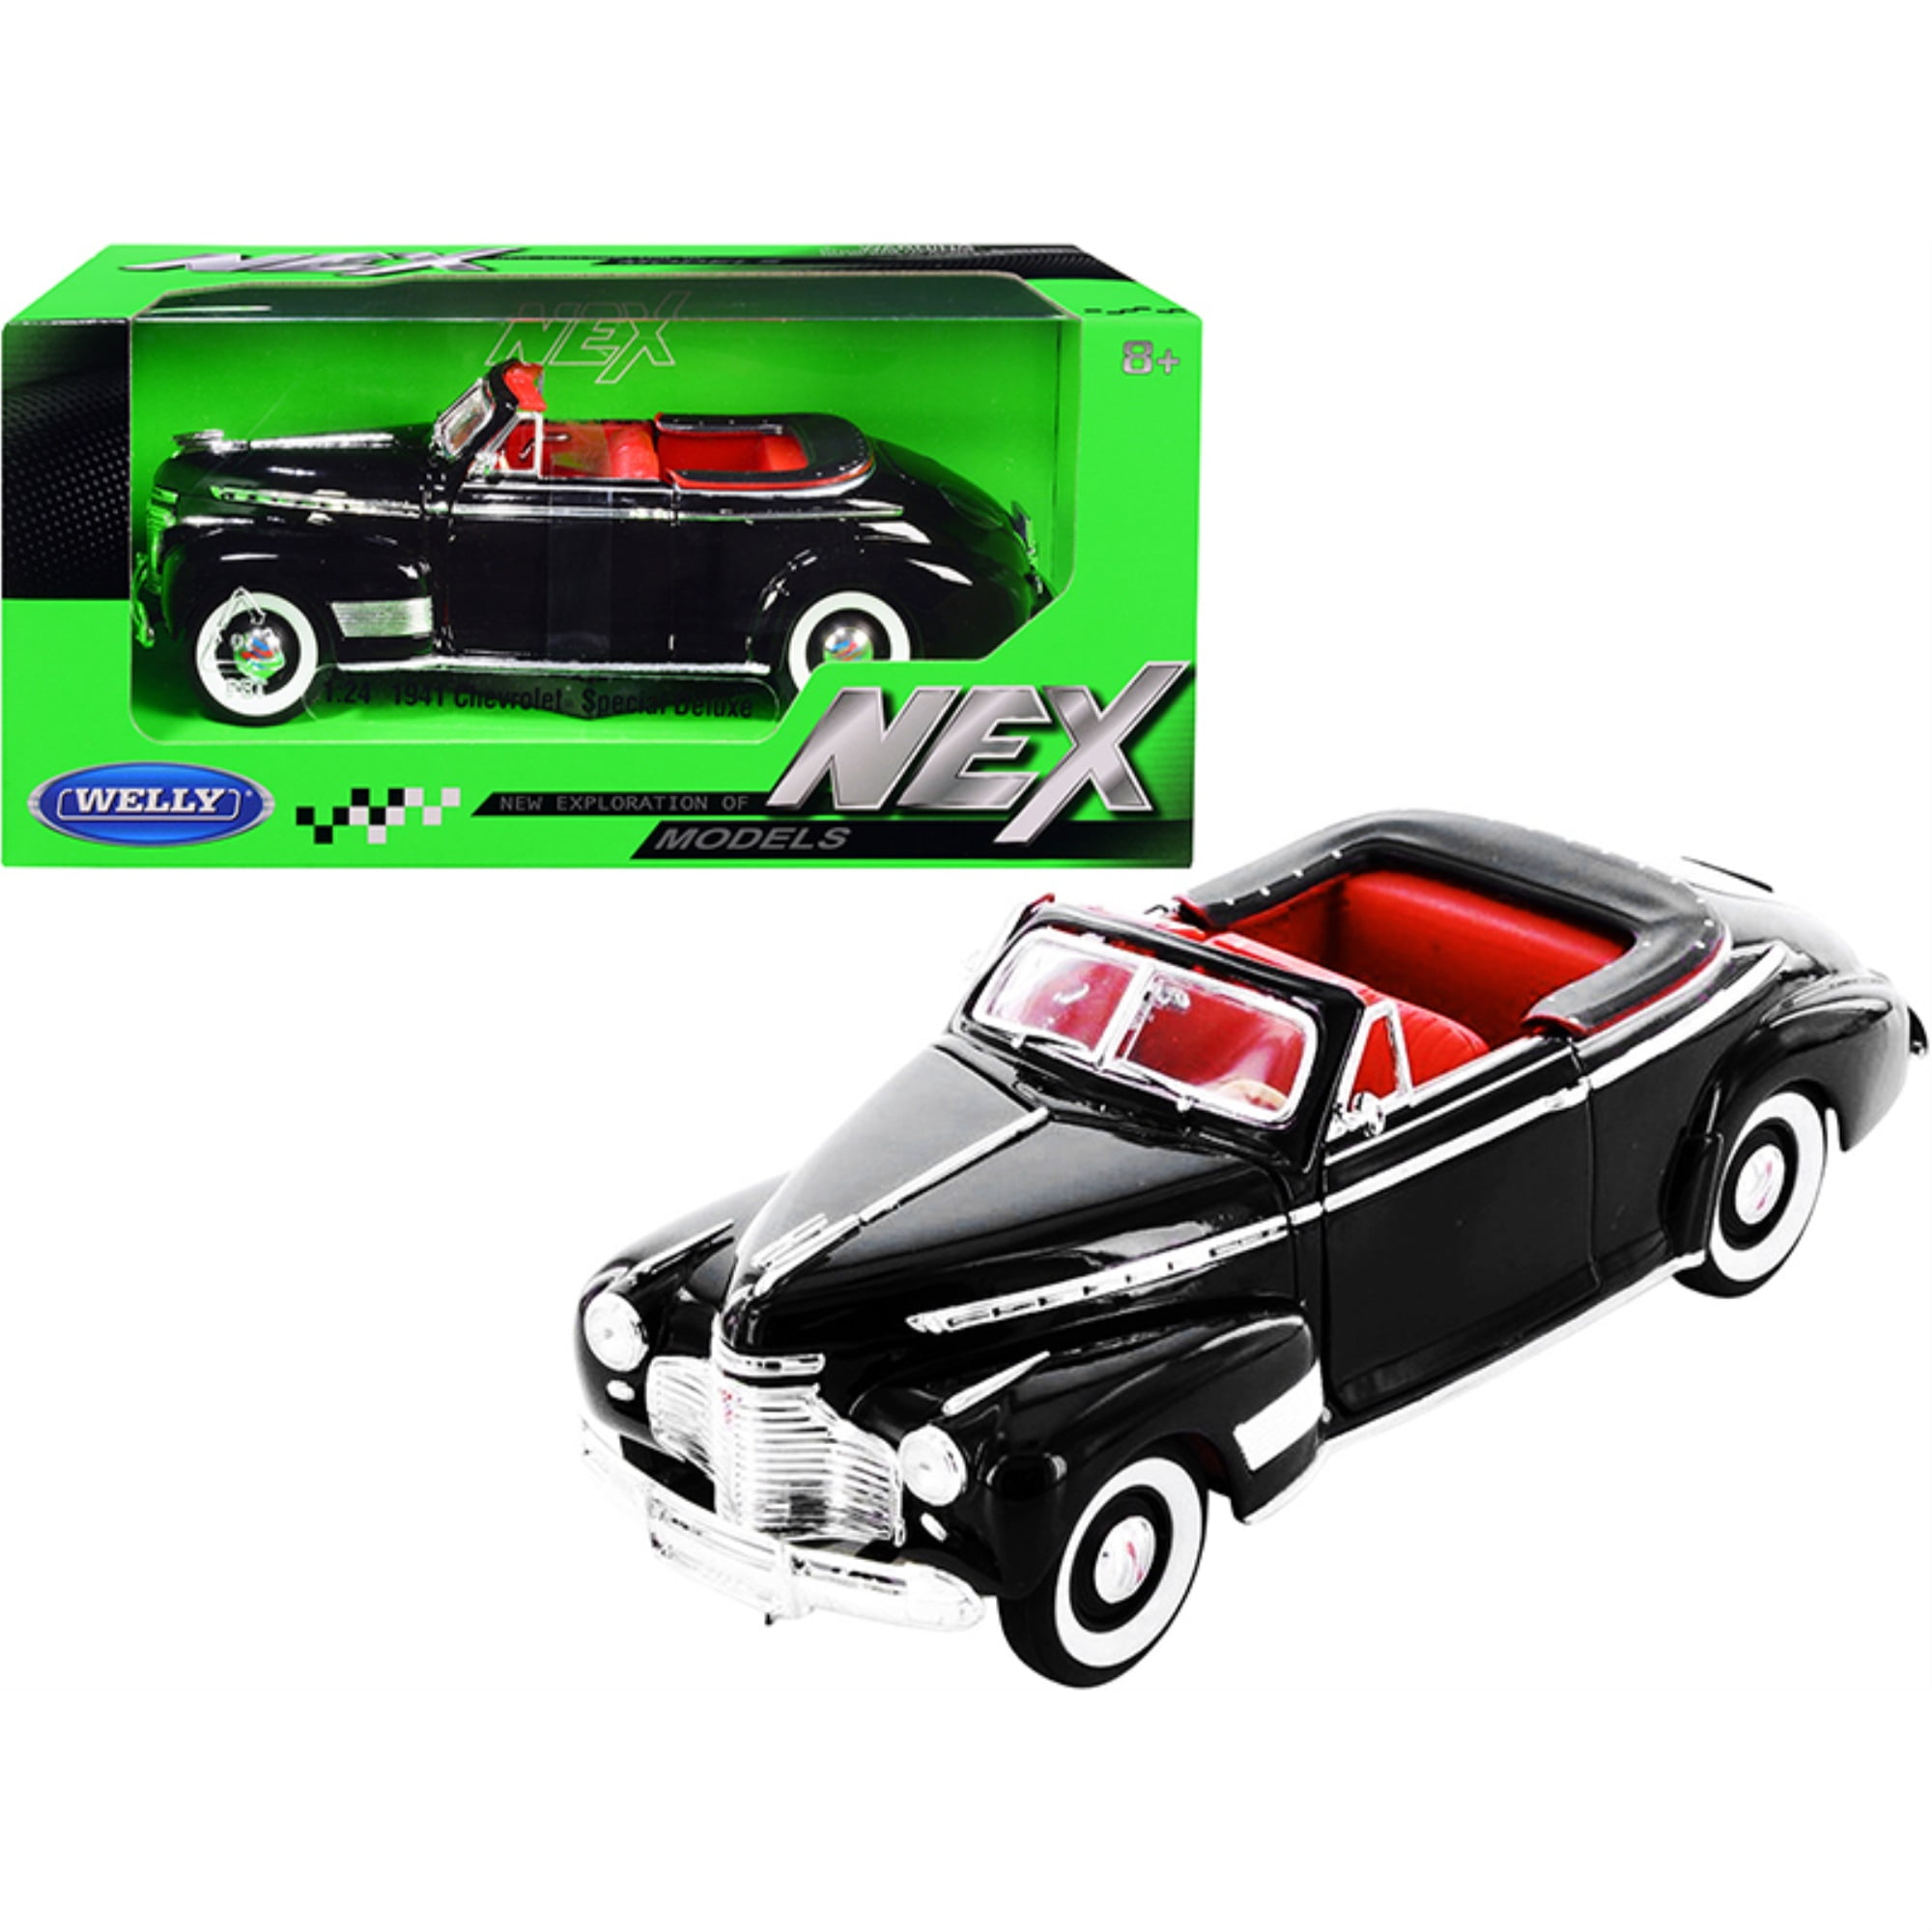 22411bk 1-24 Scale Special Deluxe Convertible 1941 Chevrolet Diecast Model Car with Interior NEX Models, Black & Red -  WELLY